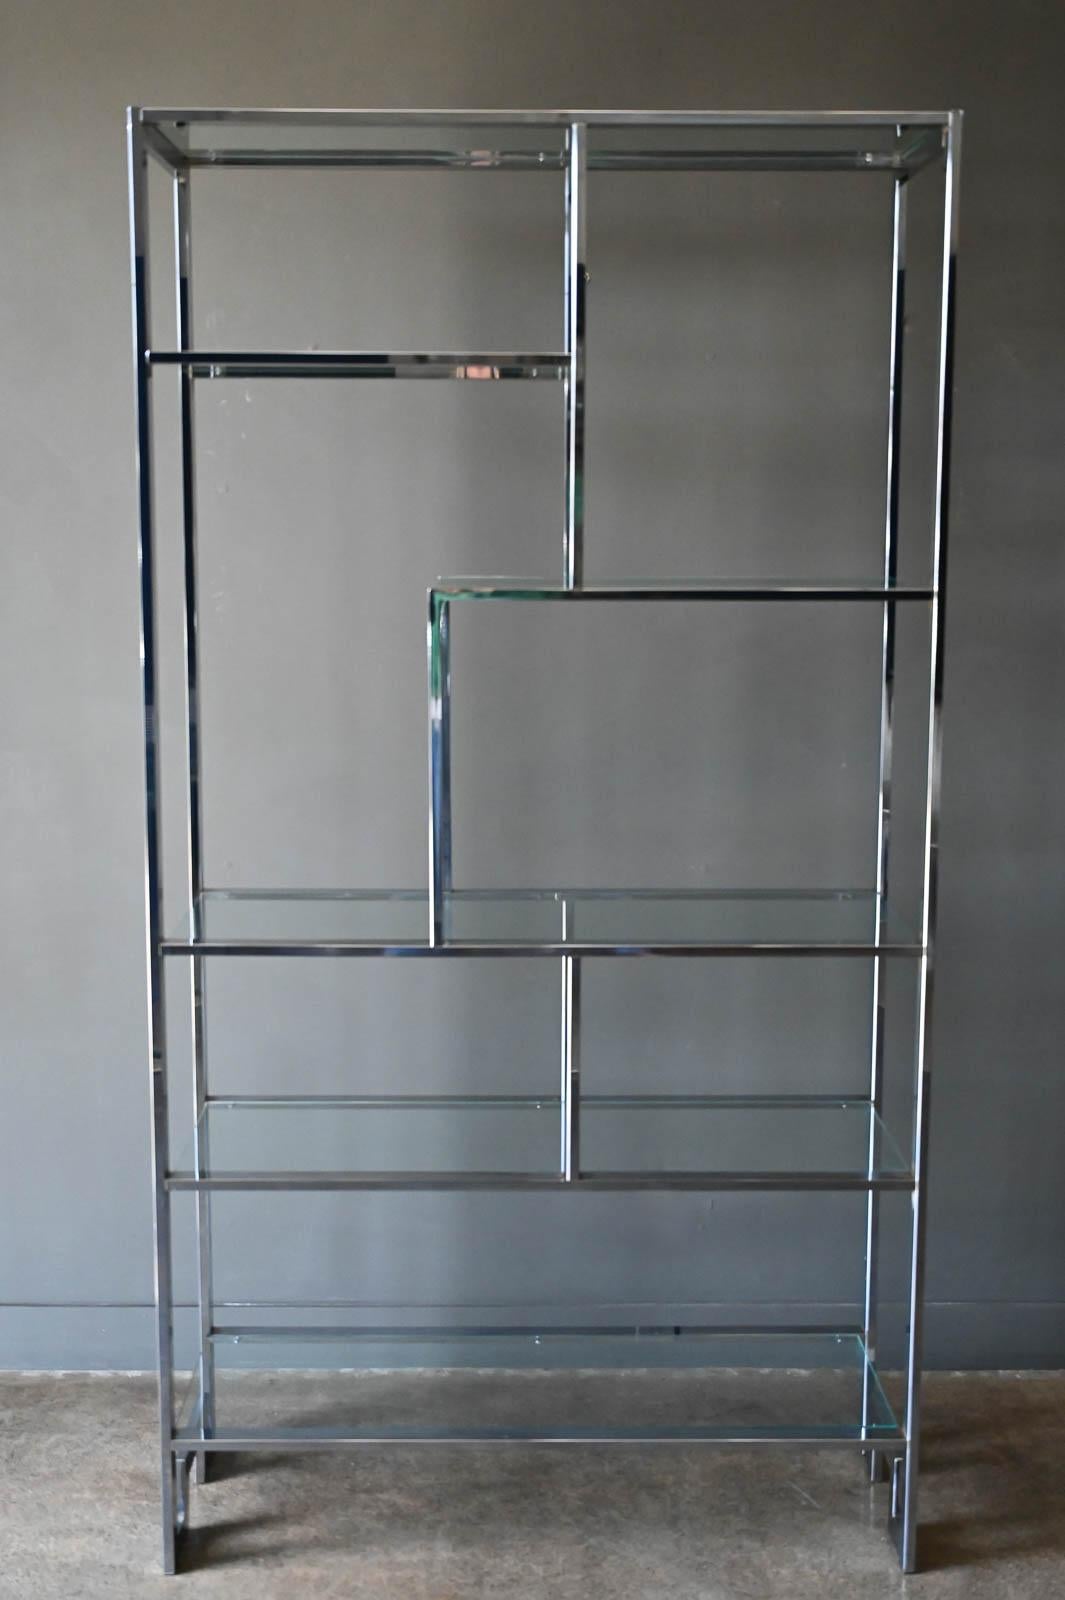 Chrome Greek Key Etagere by Design Institute of America, circa. 1970. Chromed steel and glass shelving make this piece very versatile as a shelving or display etagere or room divider. Excellent original condition with no rust or flaking. Glass